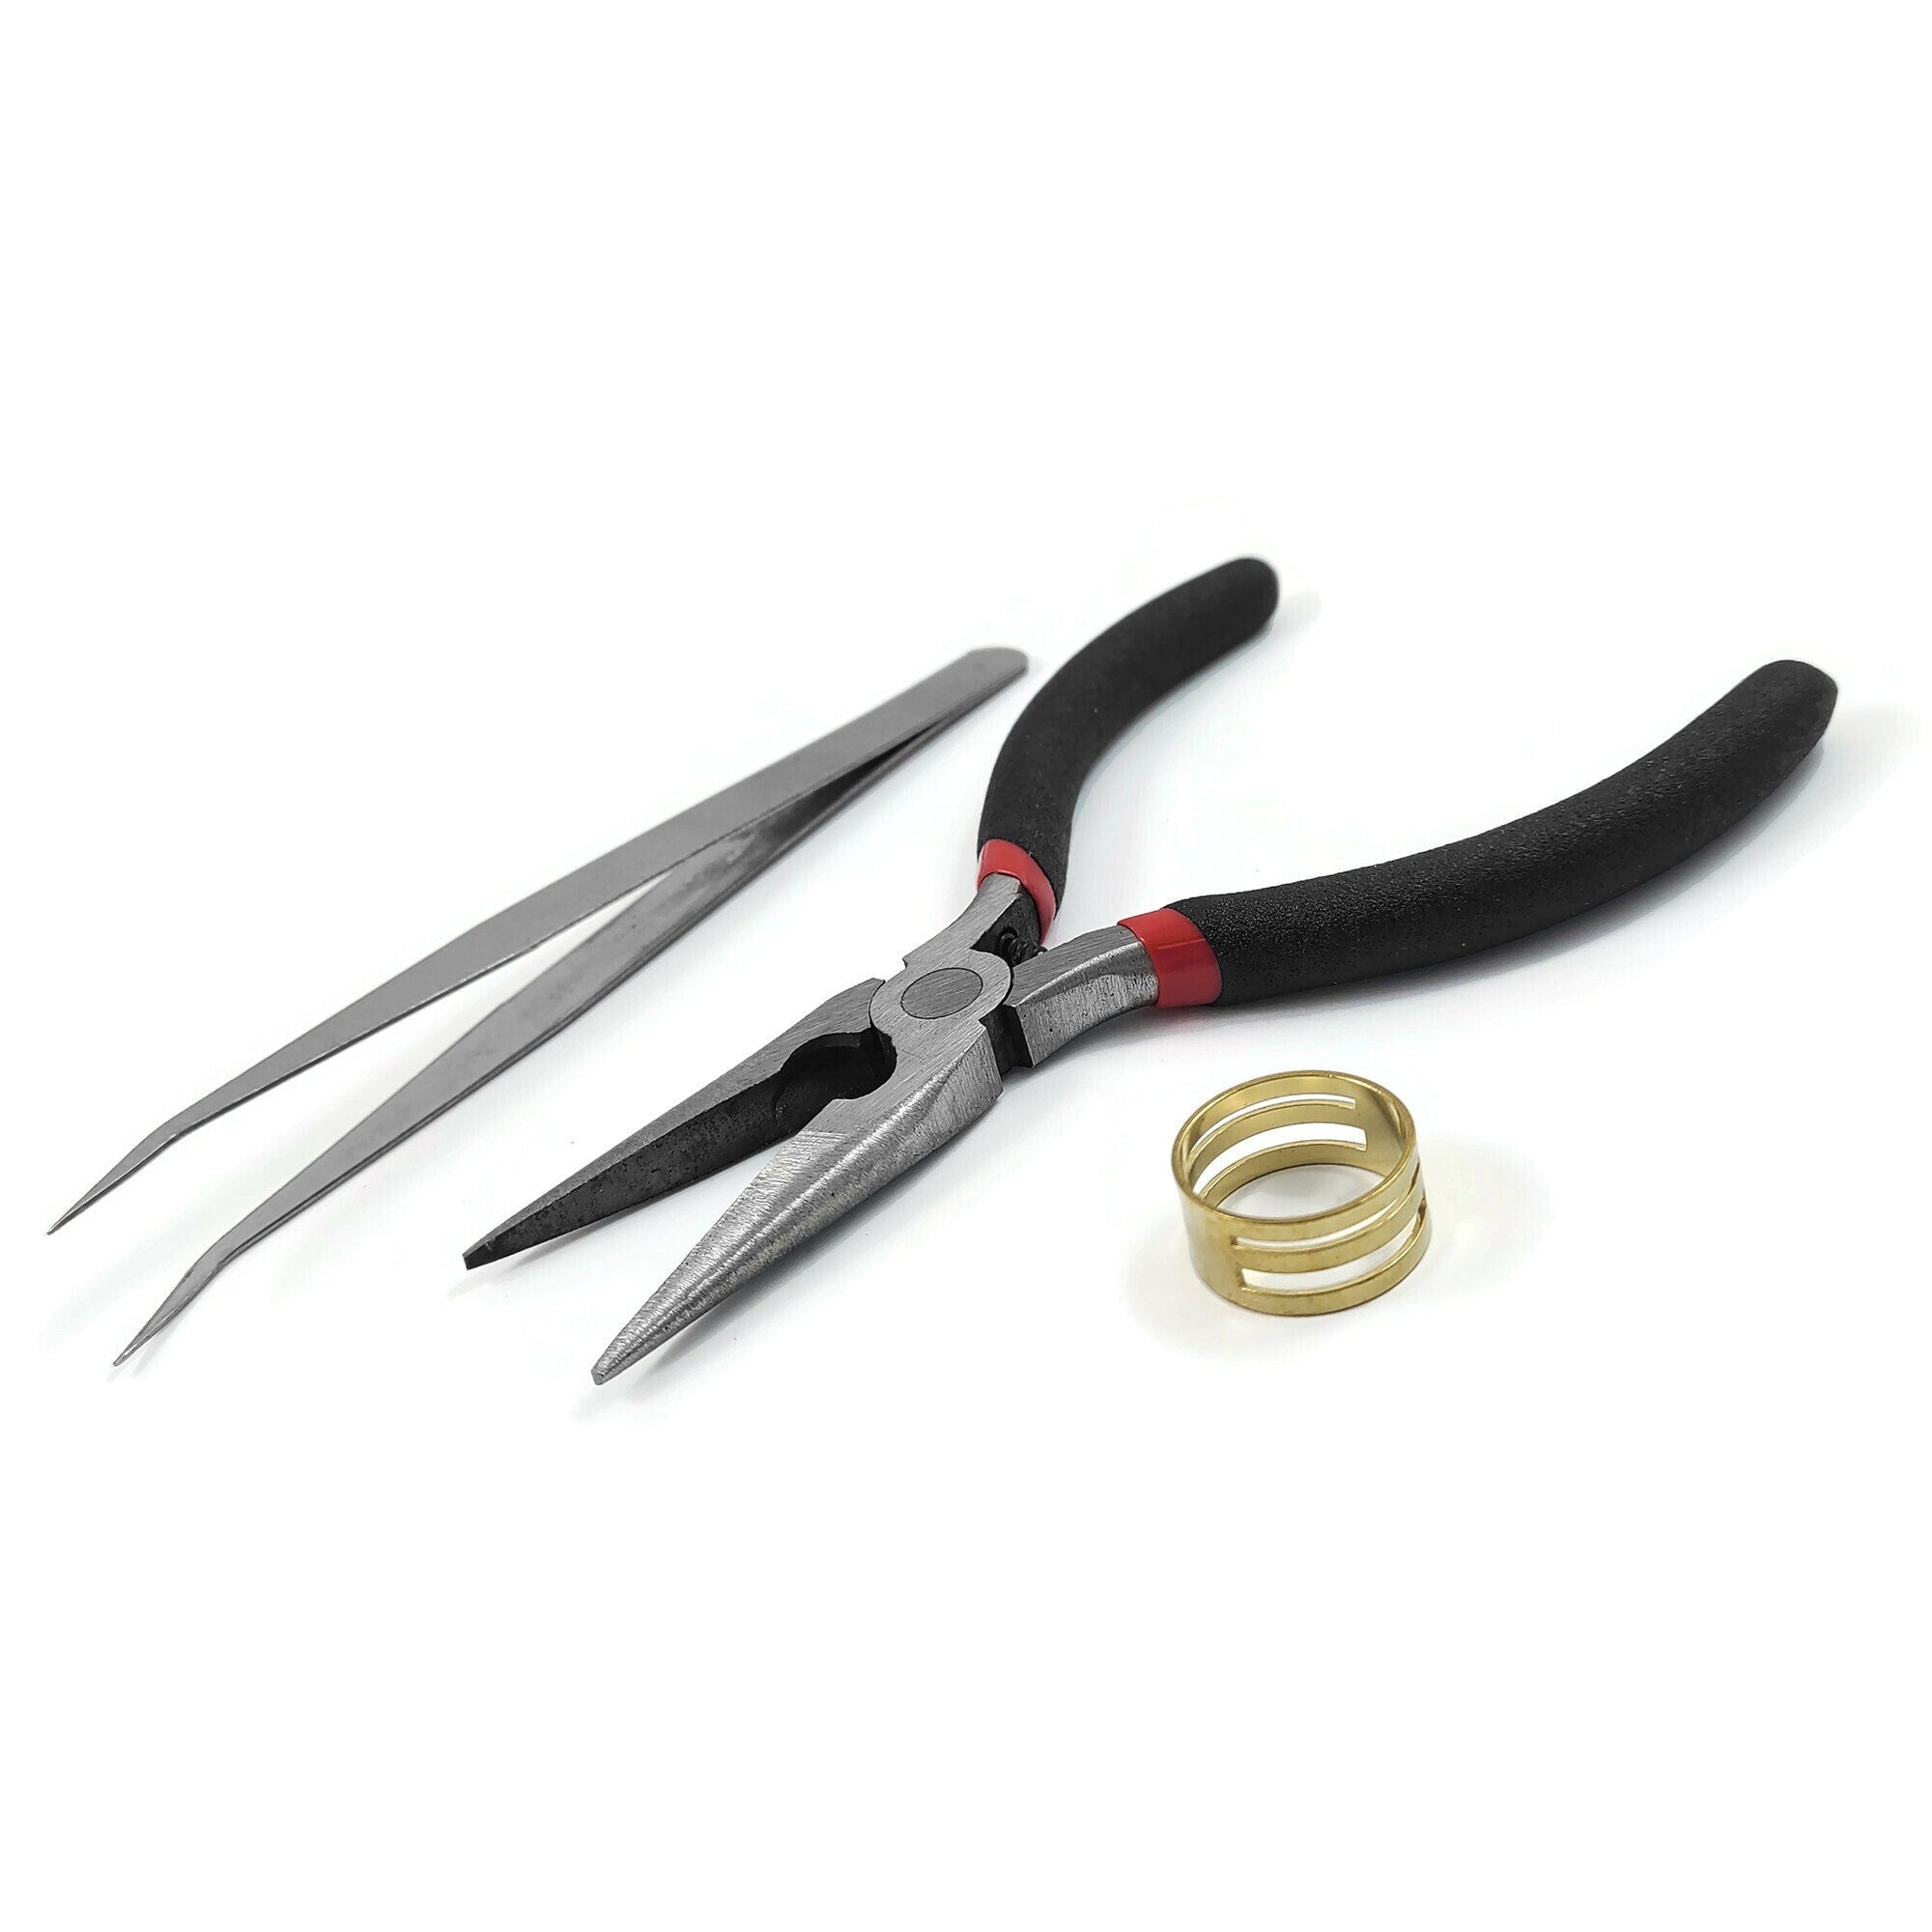 Jewelry making kit for beginners - Pliers, tweezers, and jump ring opener closer tool